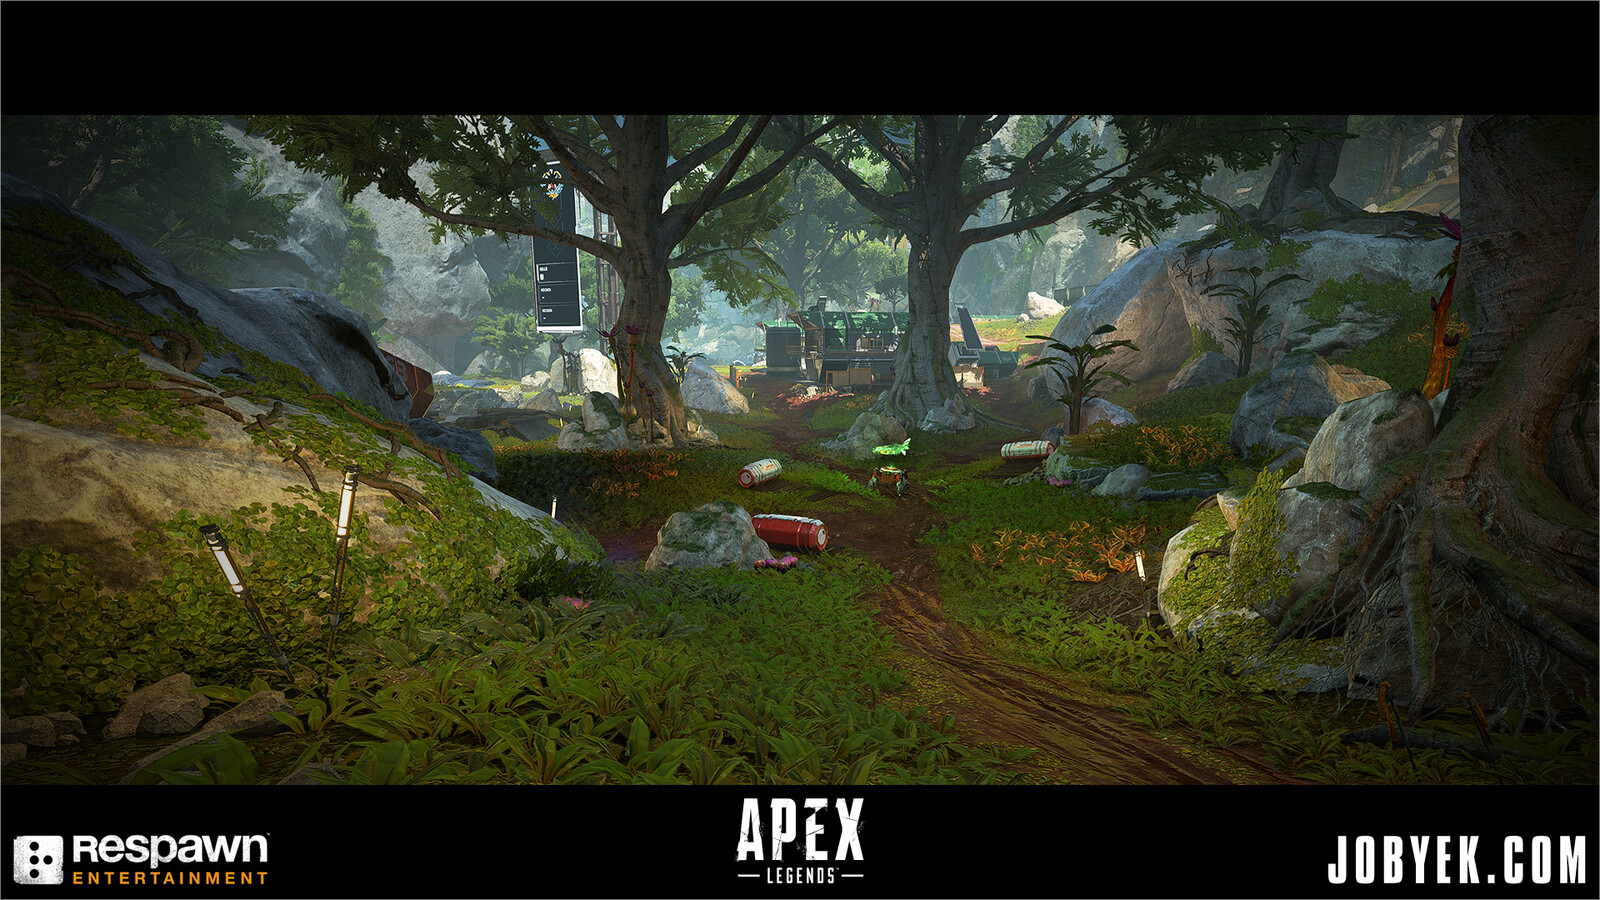 This served as our test area for our dense canopy areas and how we can push lighting and help readability.